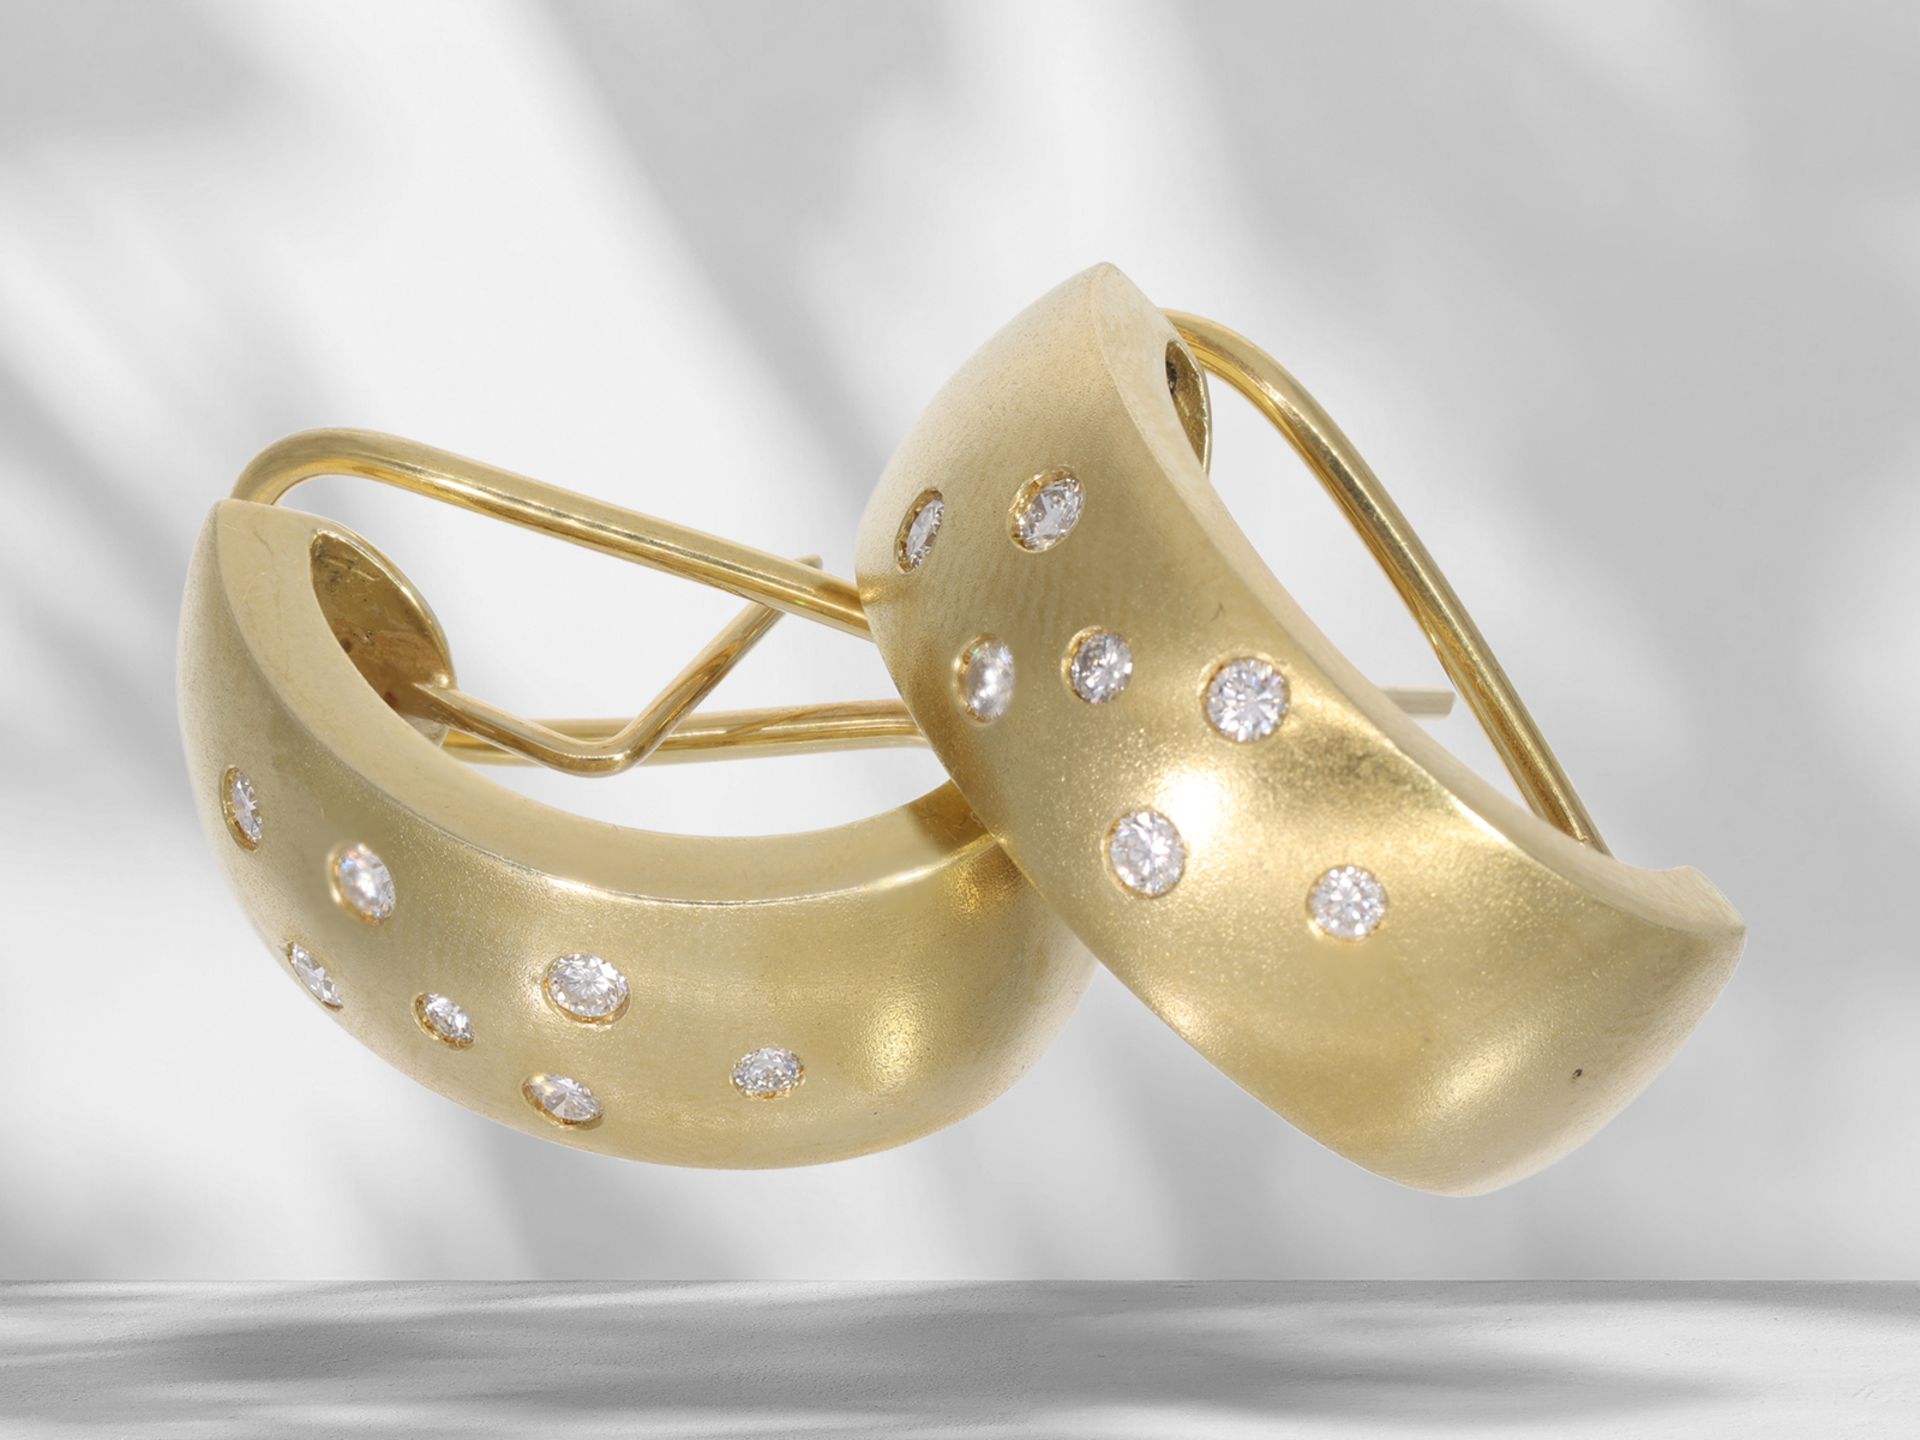 Earrings: gold, high-quality and handcrafted brilliant-cut diamond half hoops, approx. 0.5ct brillia - Image 3 of 5